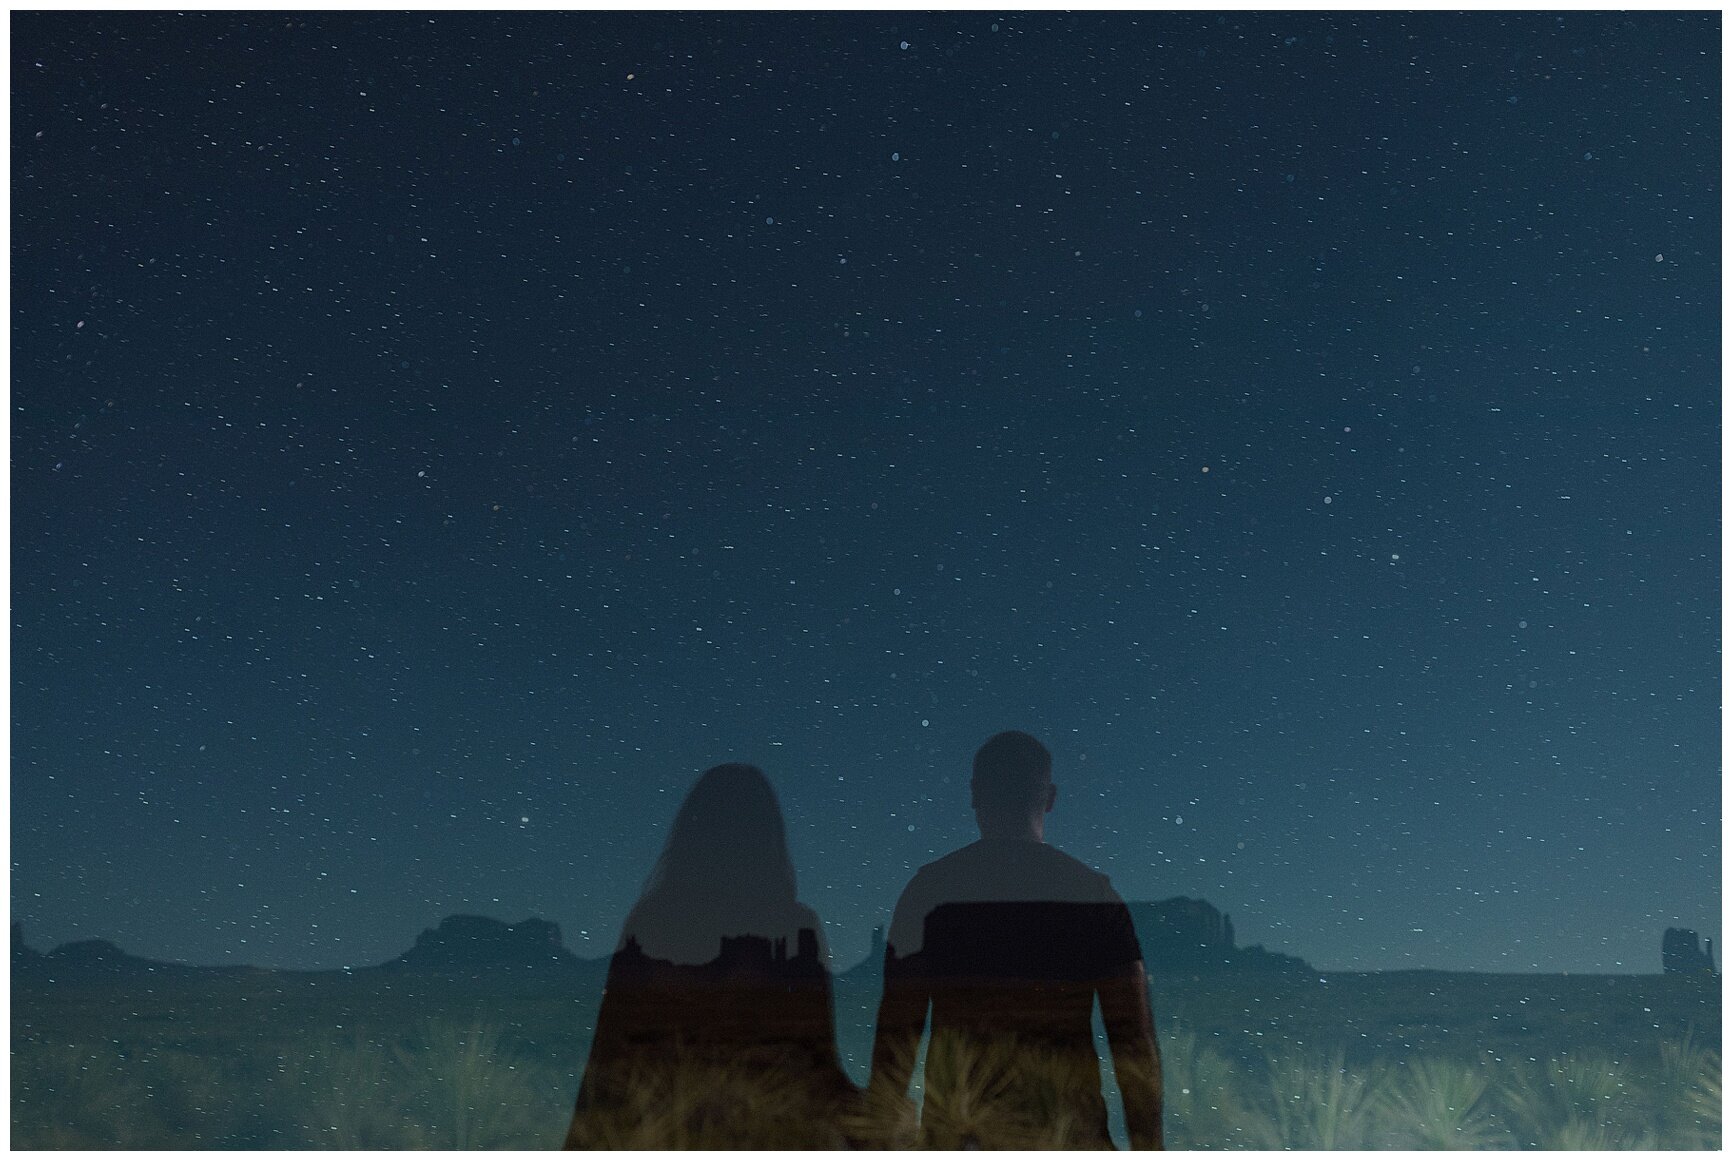 engaged couple holding hands under the starry night sky in the desert in monument valley arizona